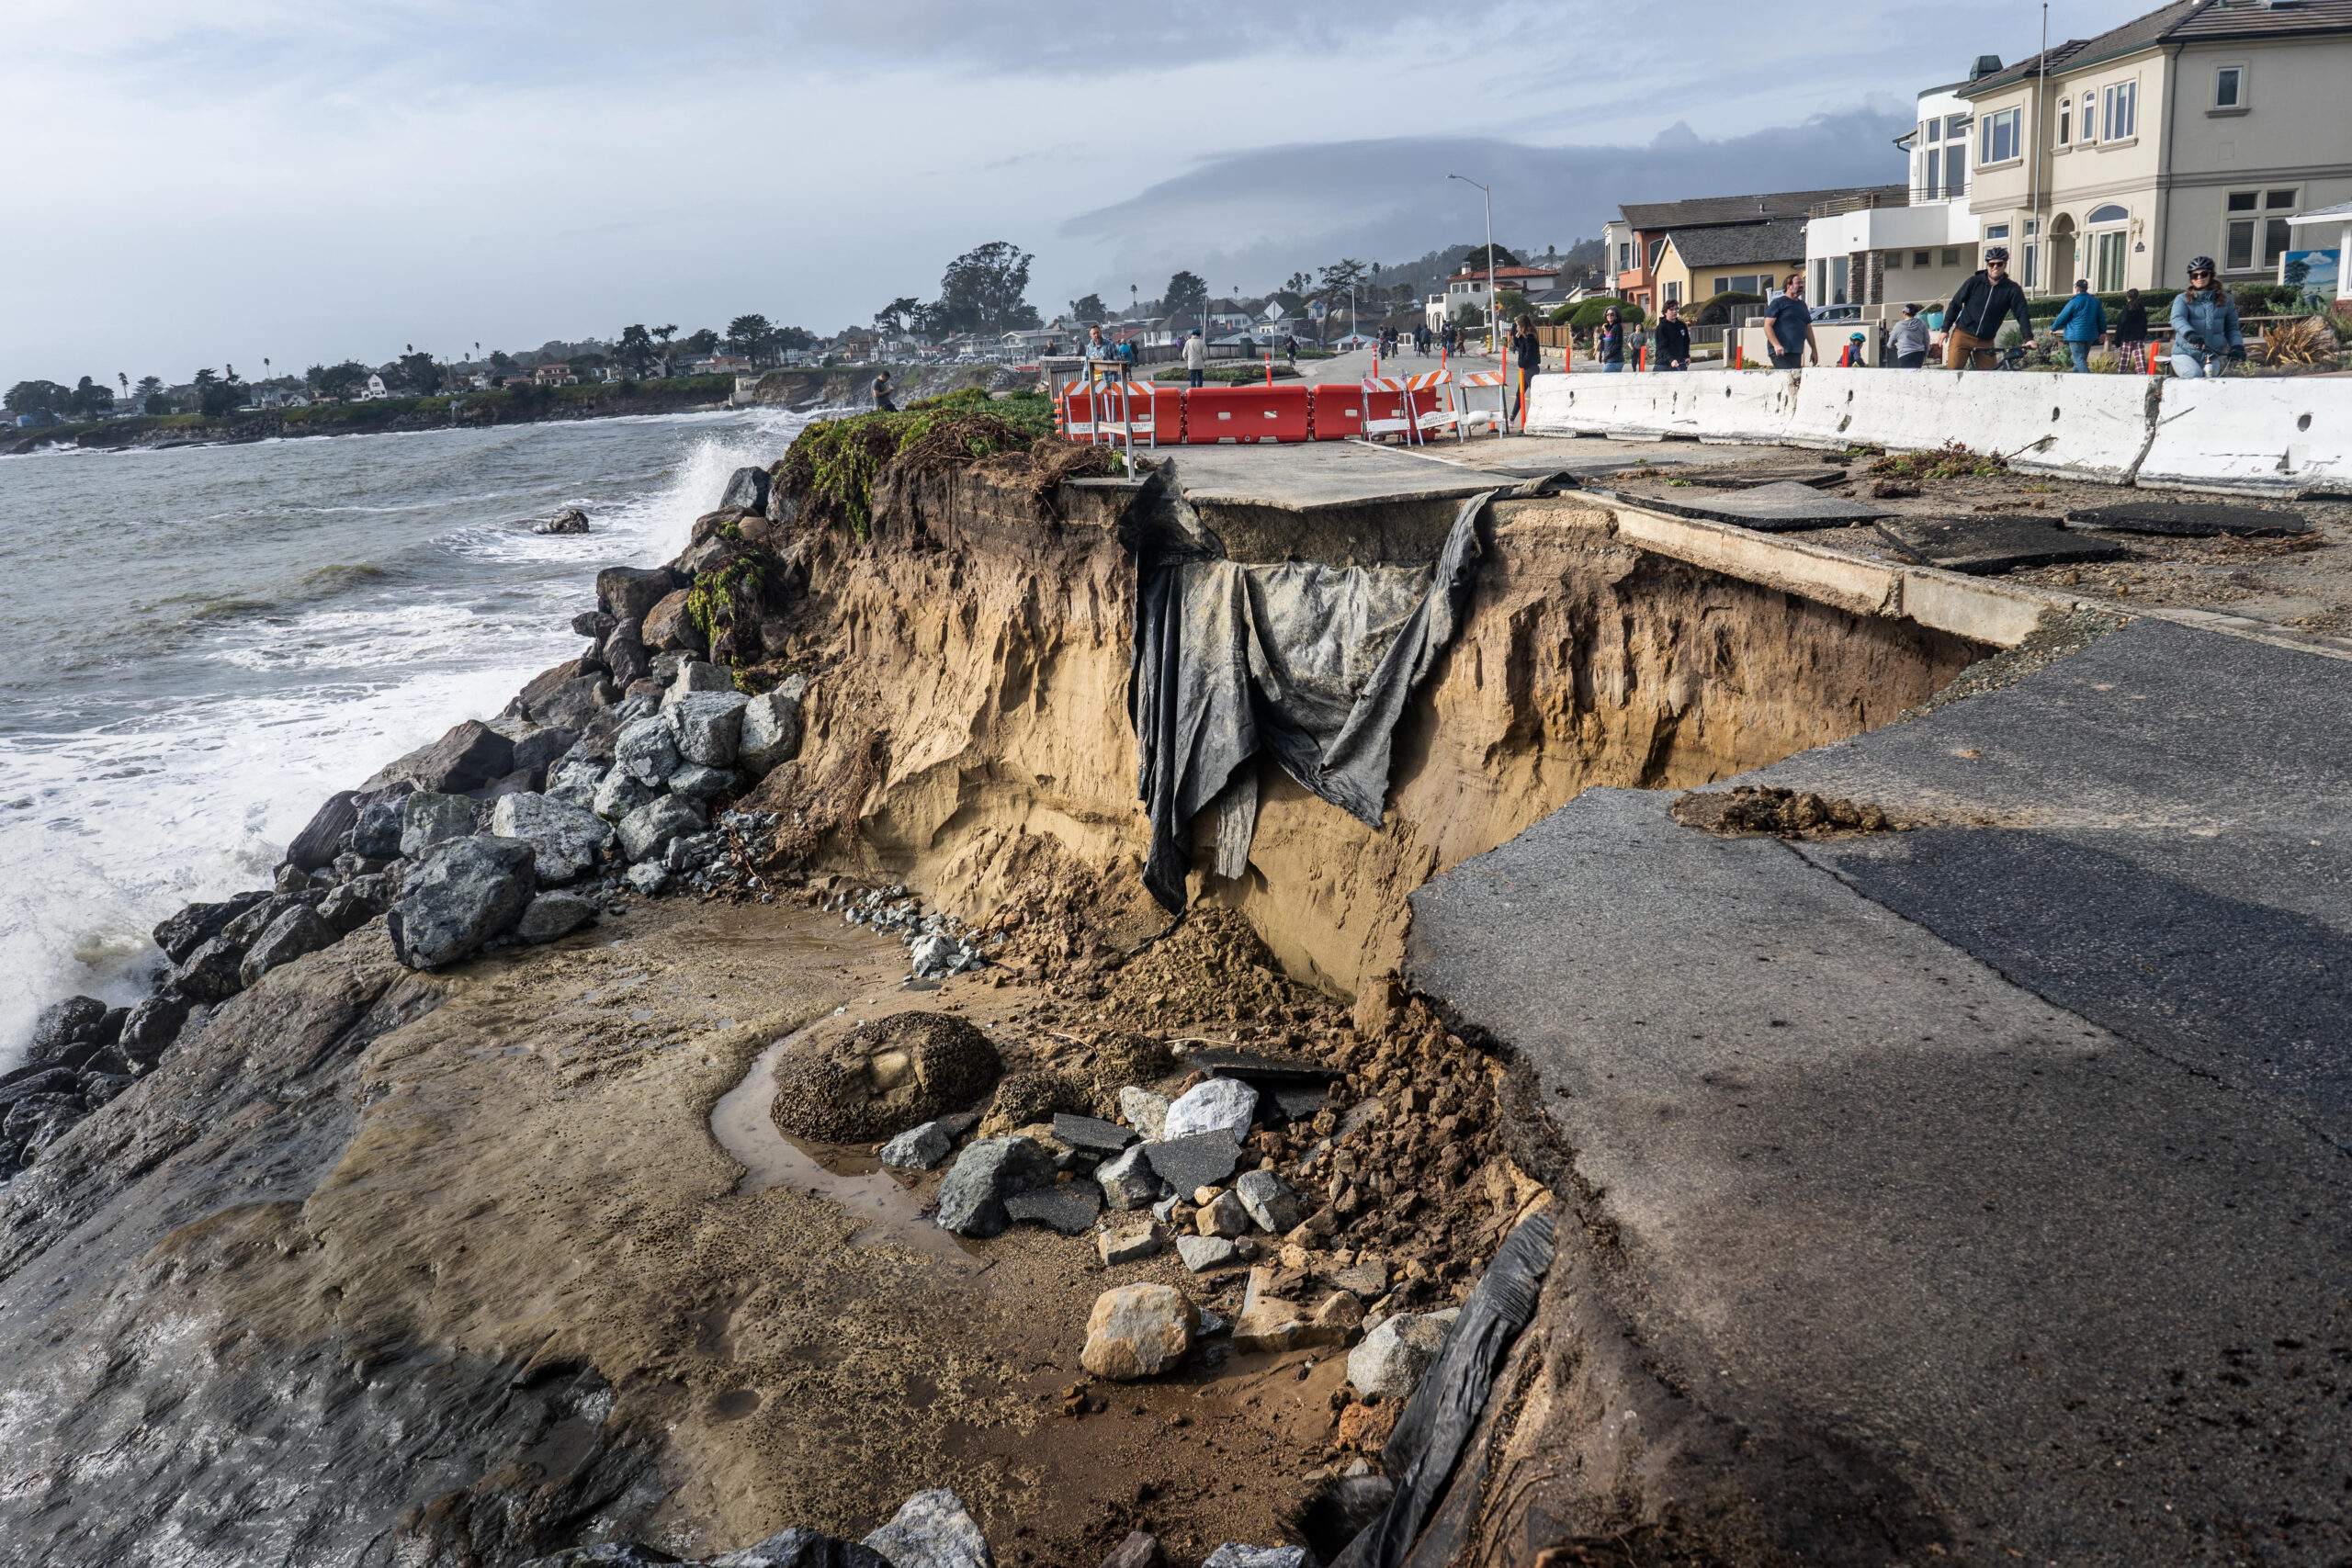 Future of Iconic Coastal Road in Doubt Following January Storms 